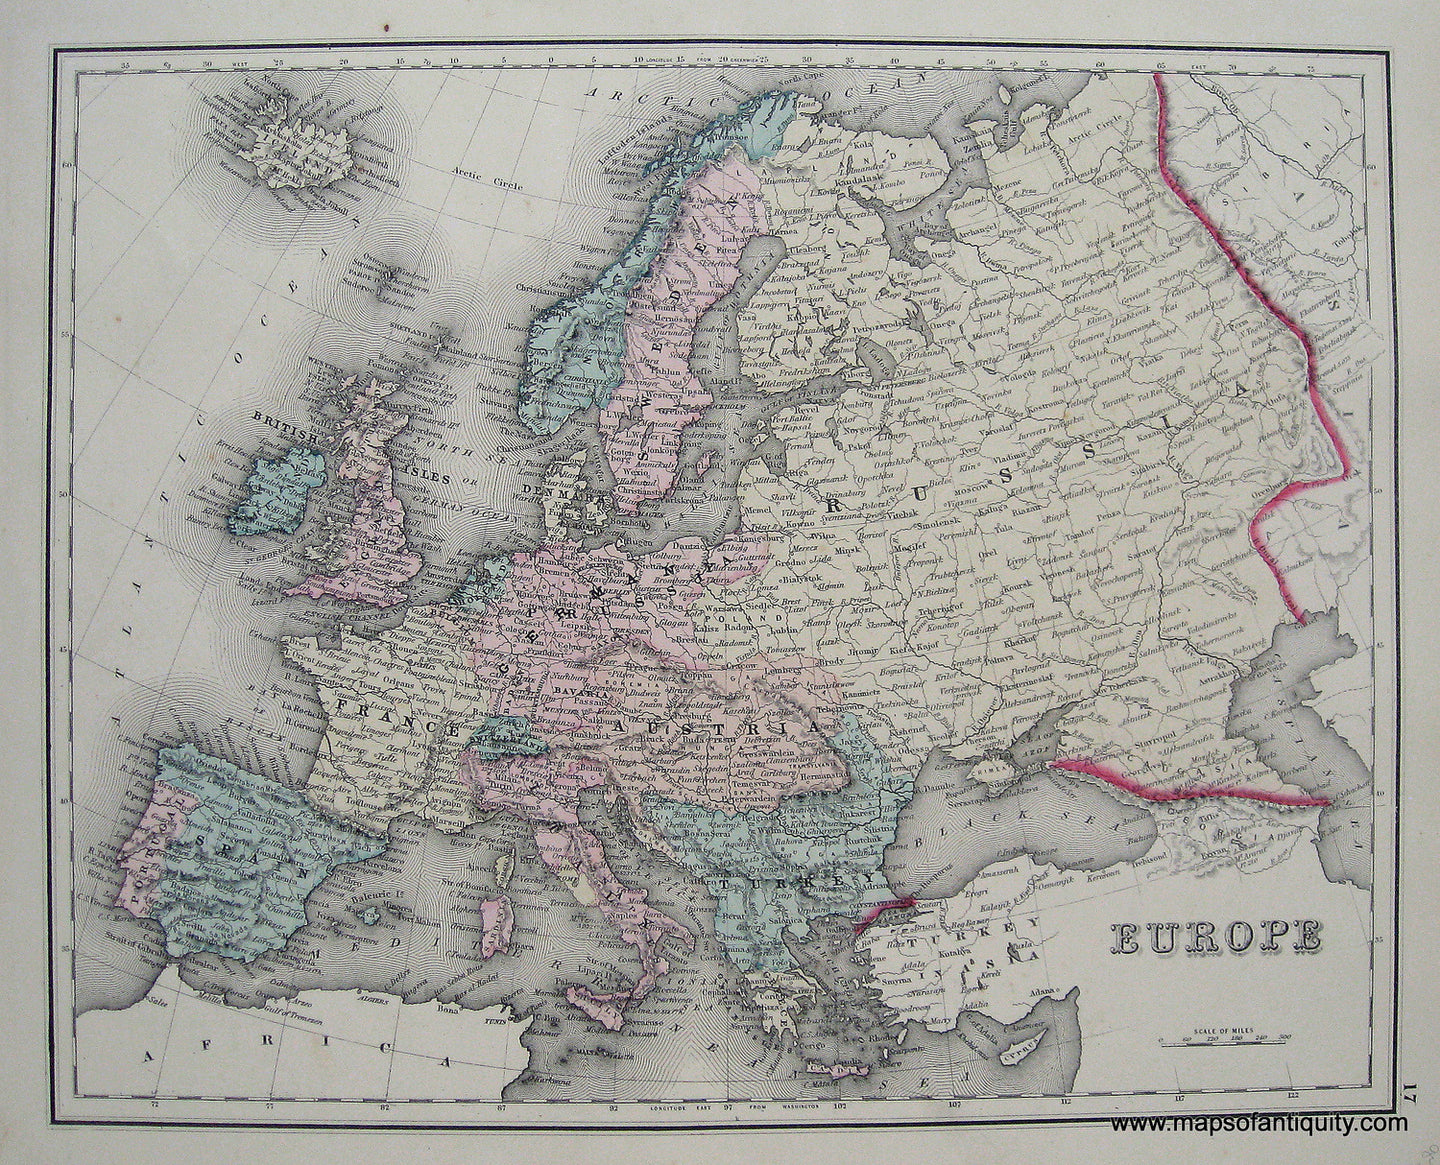 Antique-Hand-Colored-Map-Europe-verso-Asia-******-Europe-Europe-General-1876-Gray-Maps-Of-Antiquity